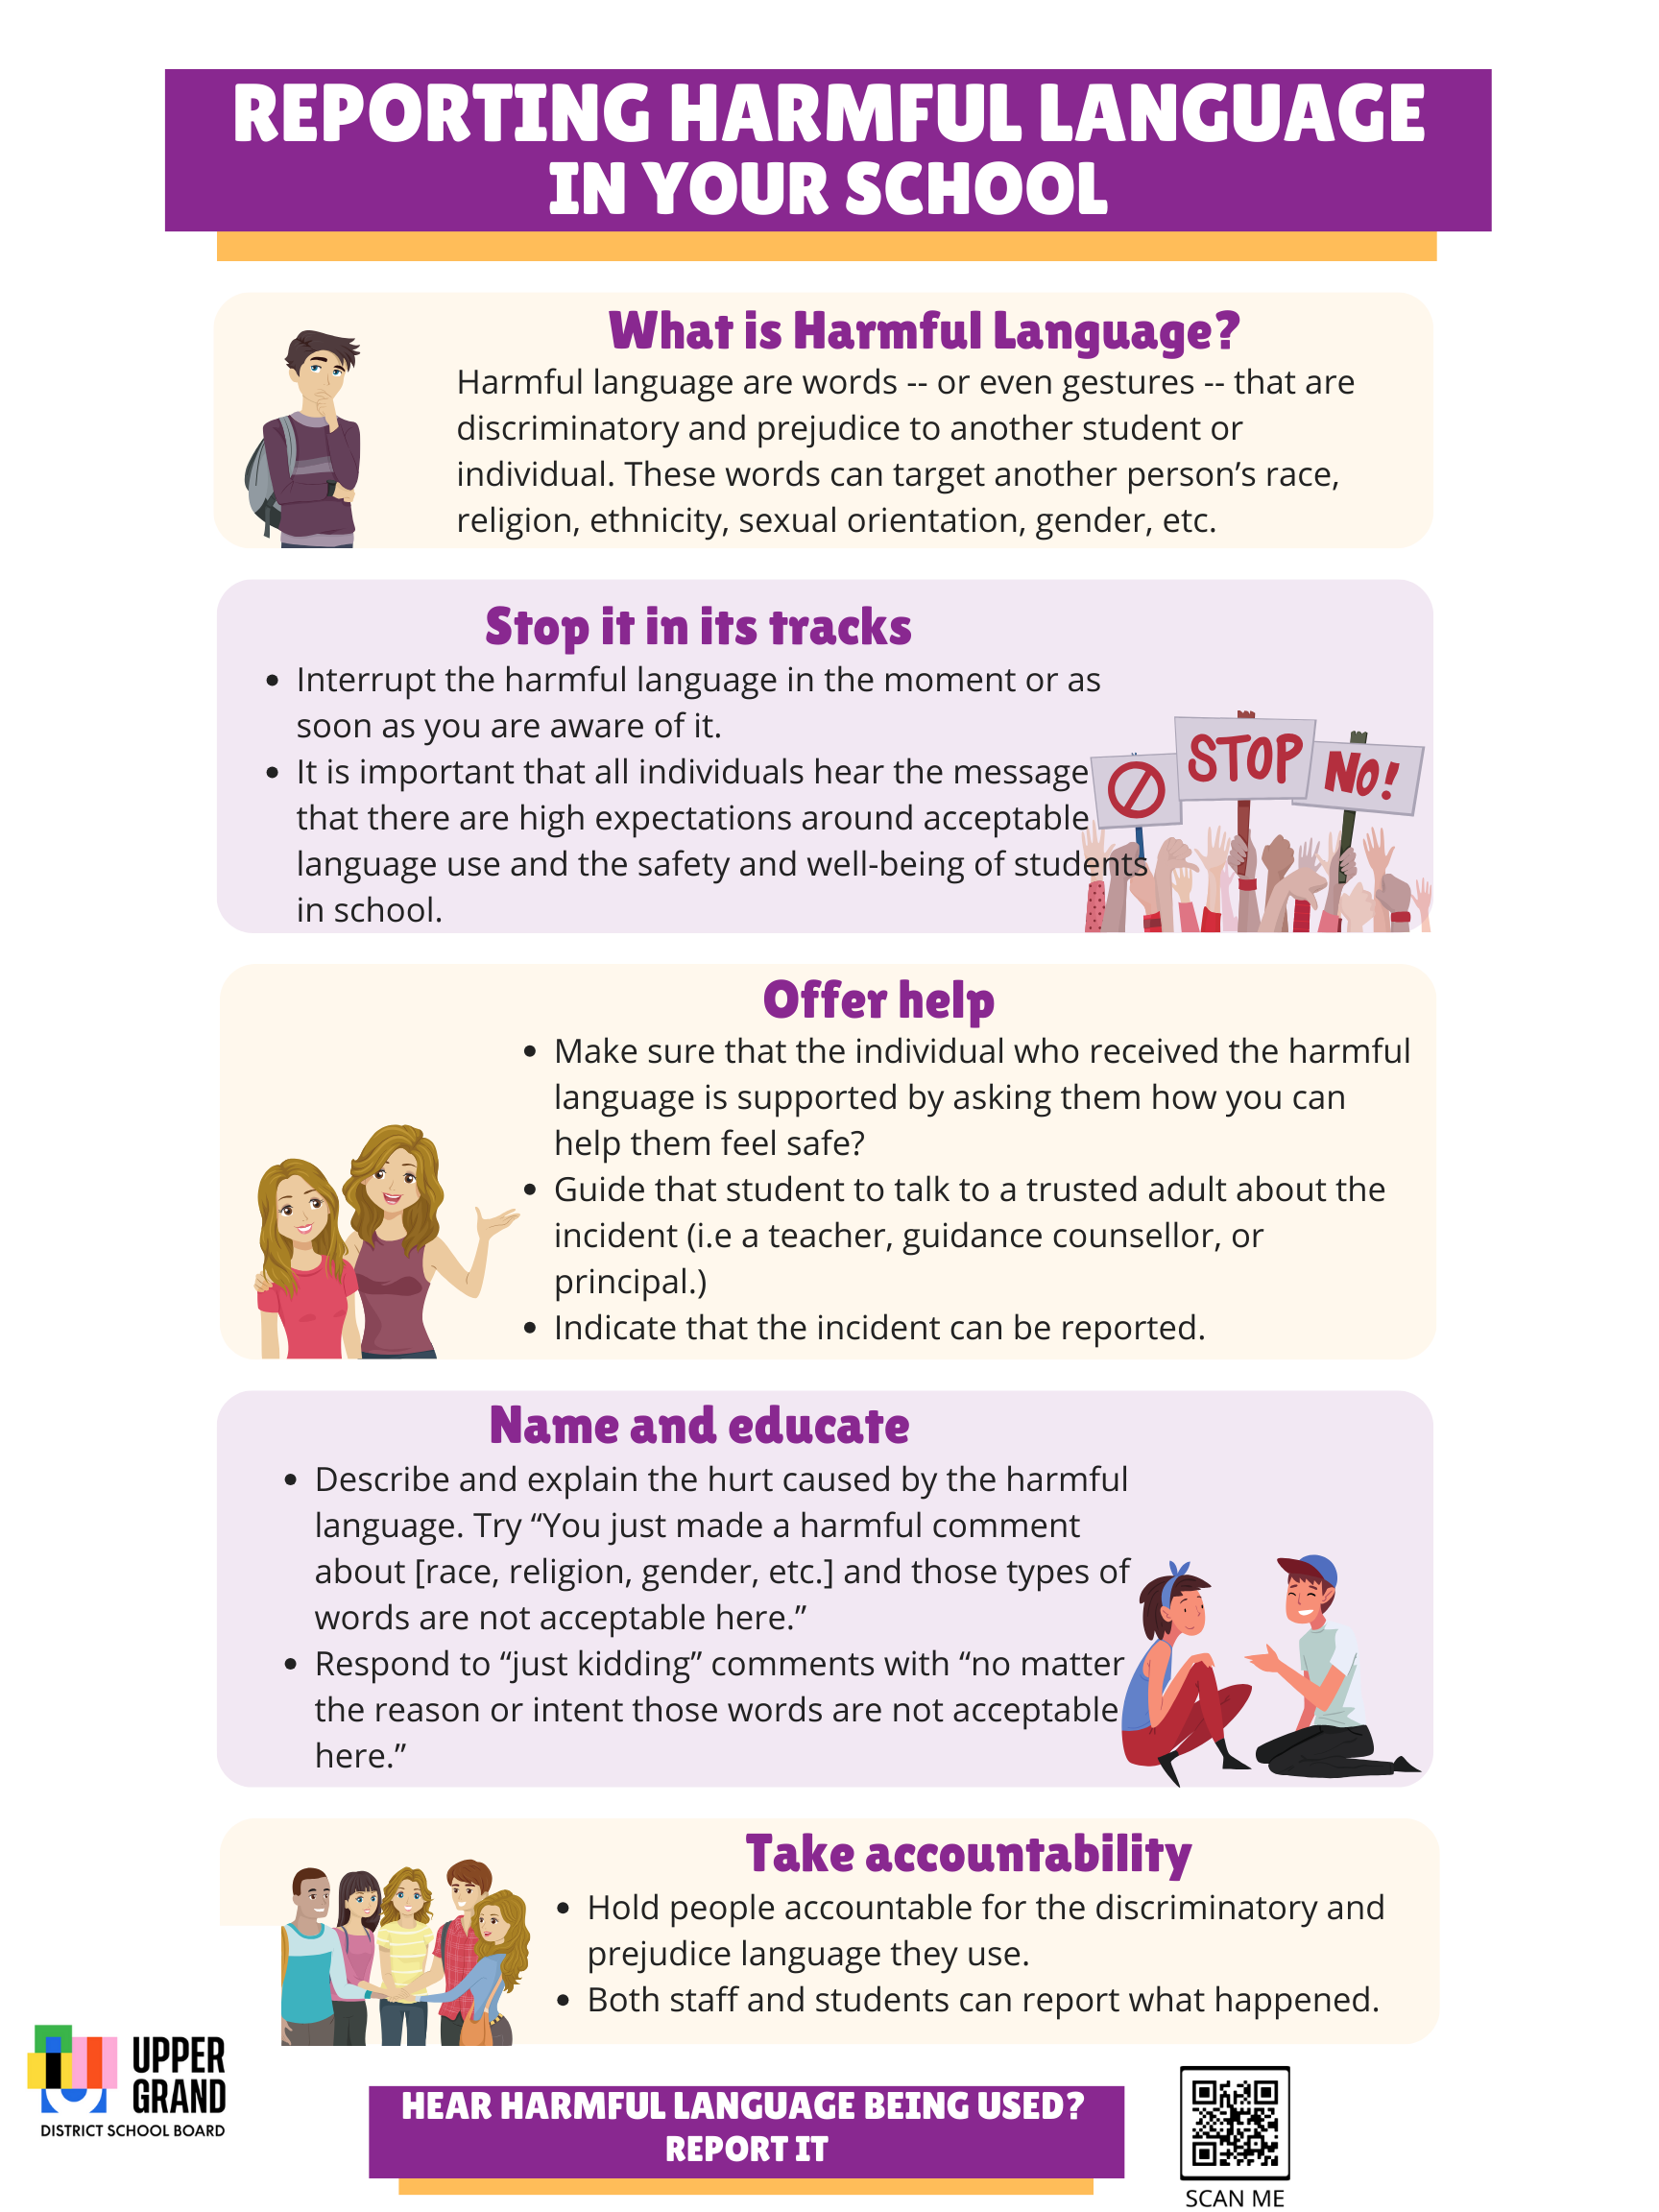 This photo features an infographic about reporting harmful language in schools.